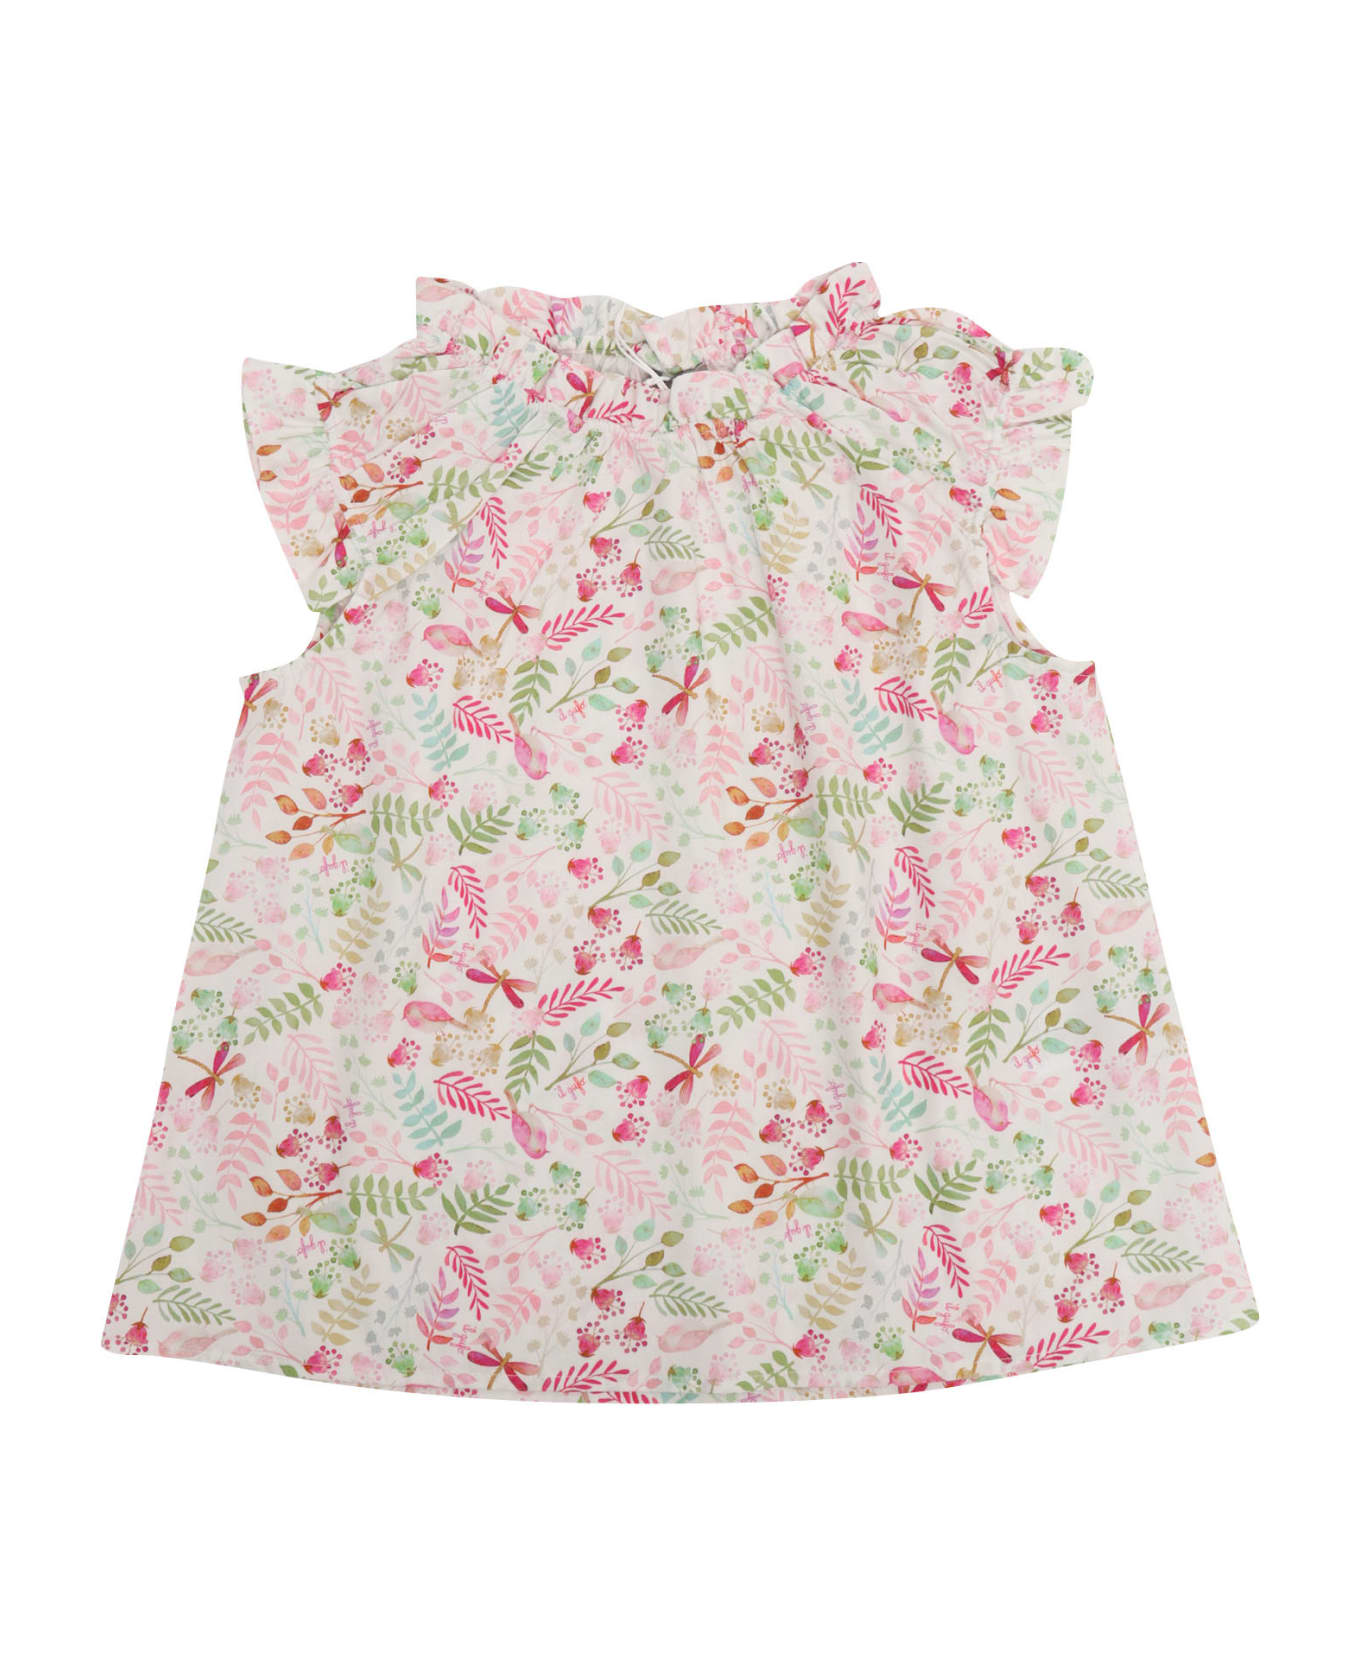 Il Gufo Floral T-shirt For Girls - PINK